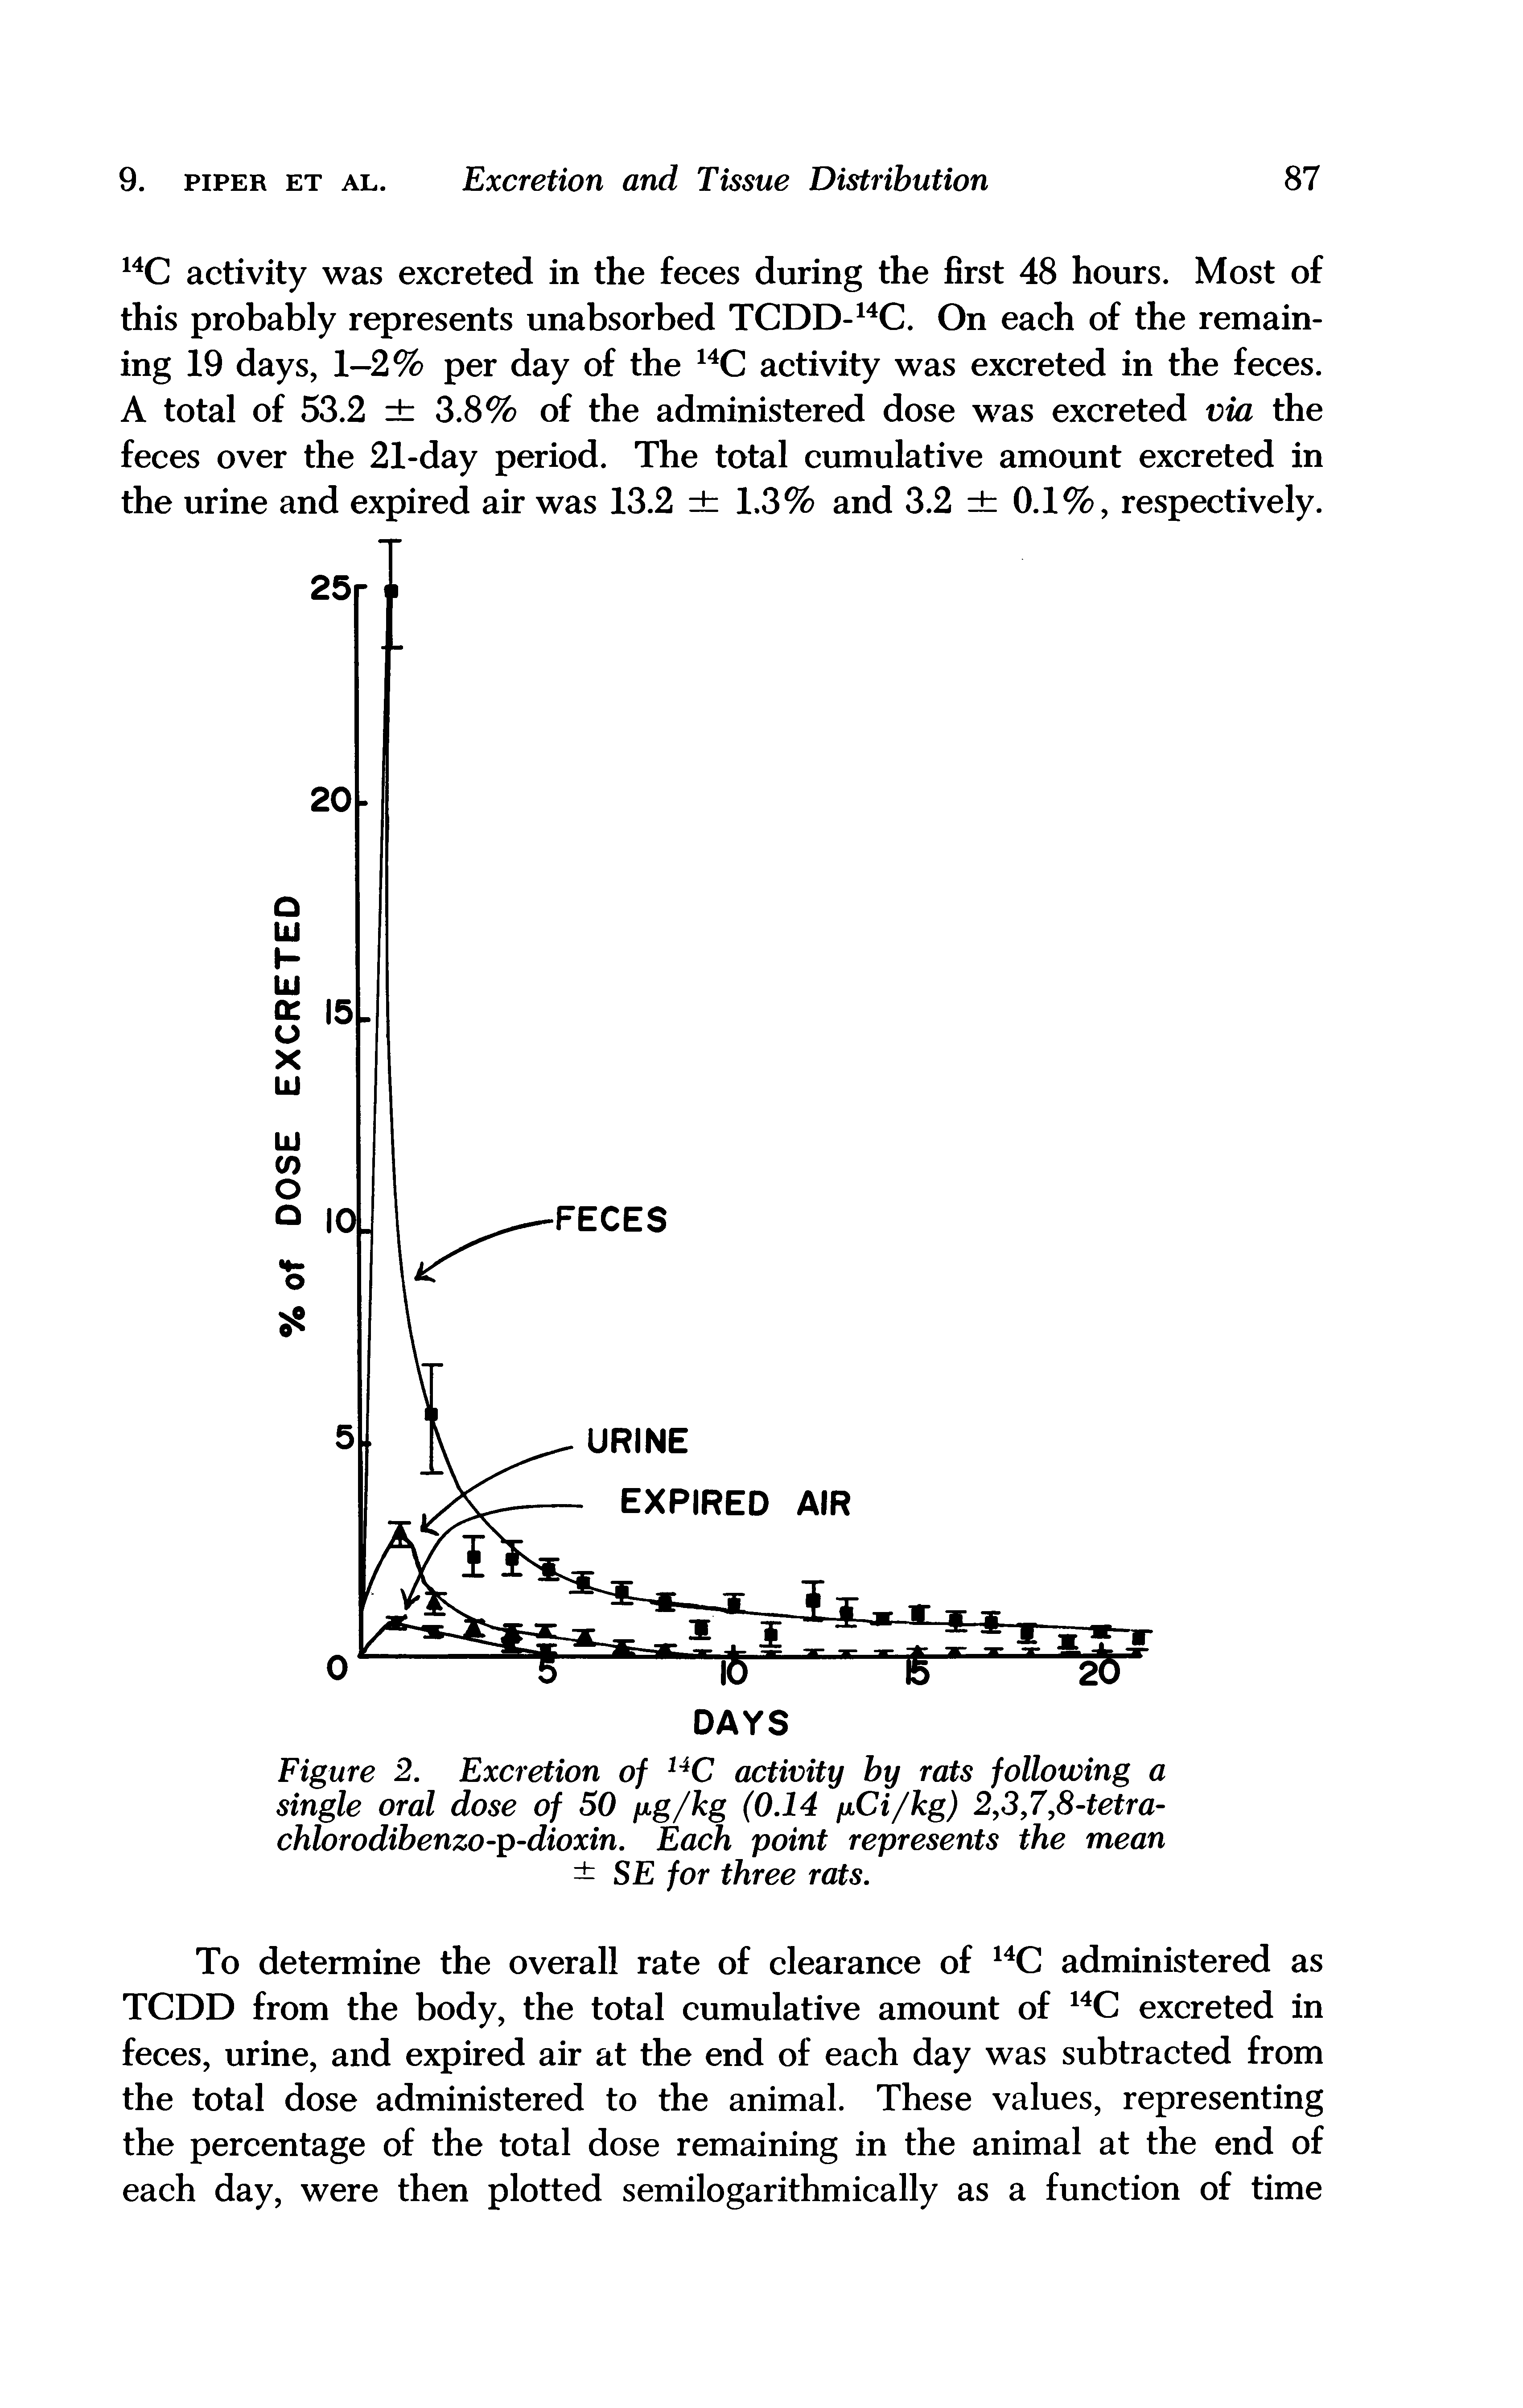 Figure 2. Excretion of activity by rats following a single oral dose of 50 fJig/kg (0.14 iCi/kg) 2,3J,8-tetra-chlorodibenzo-p-dioxin. Each point represents the mean SE for three rats.